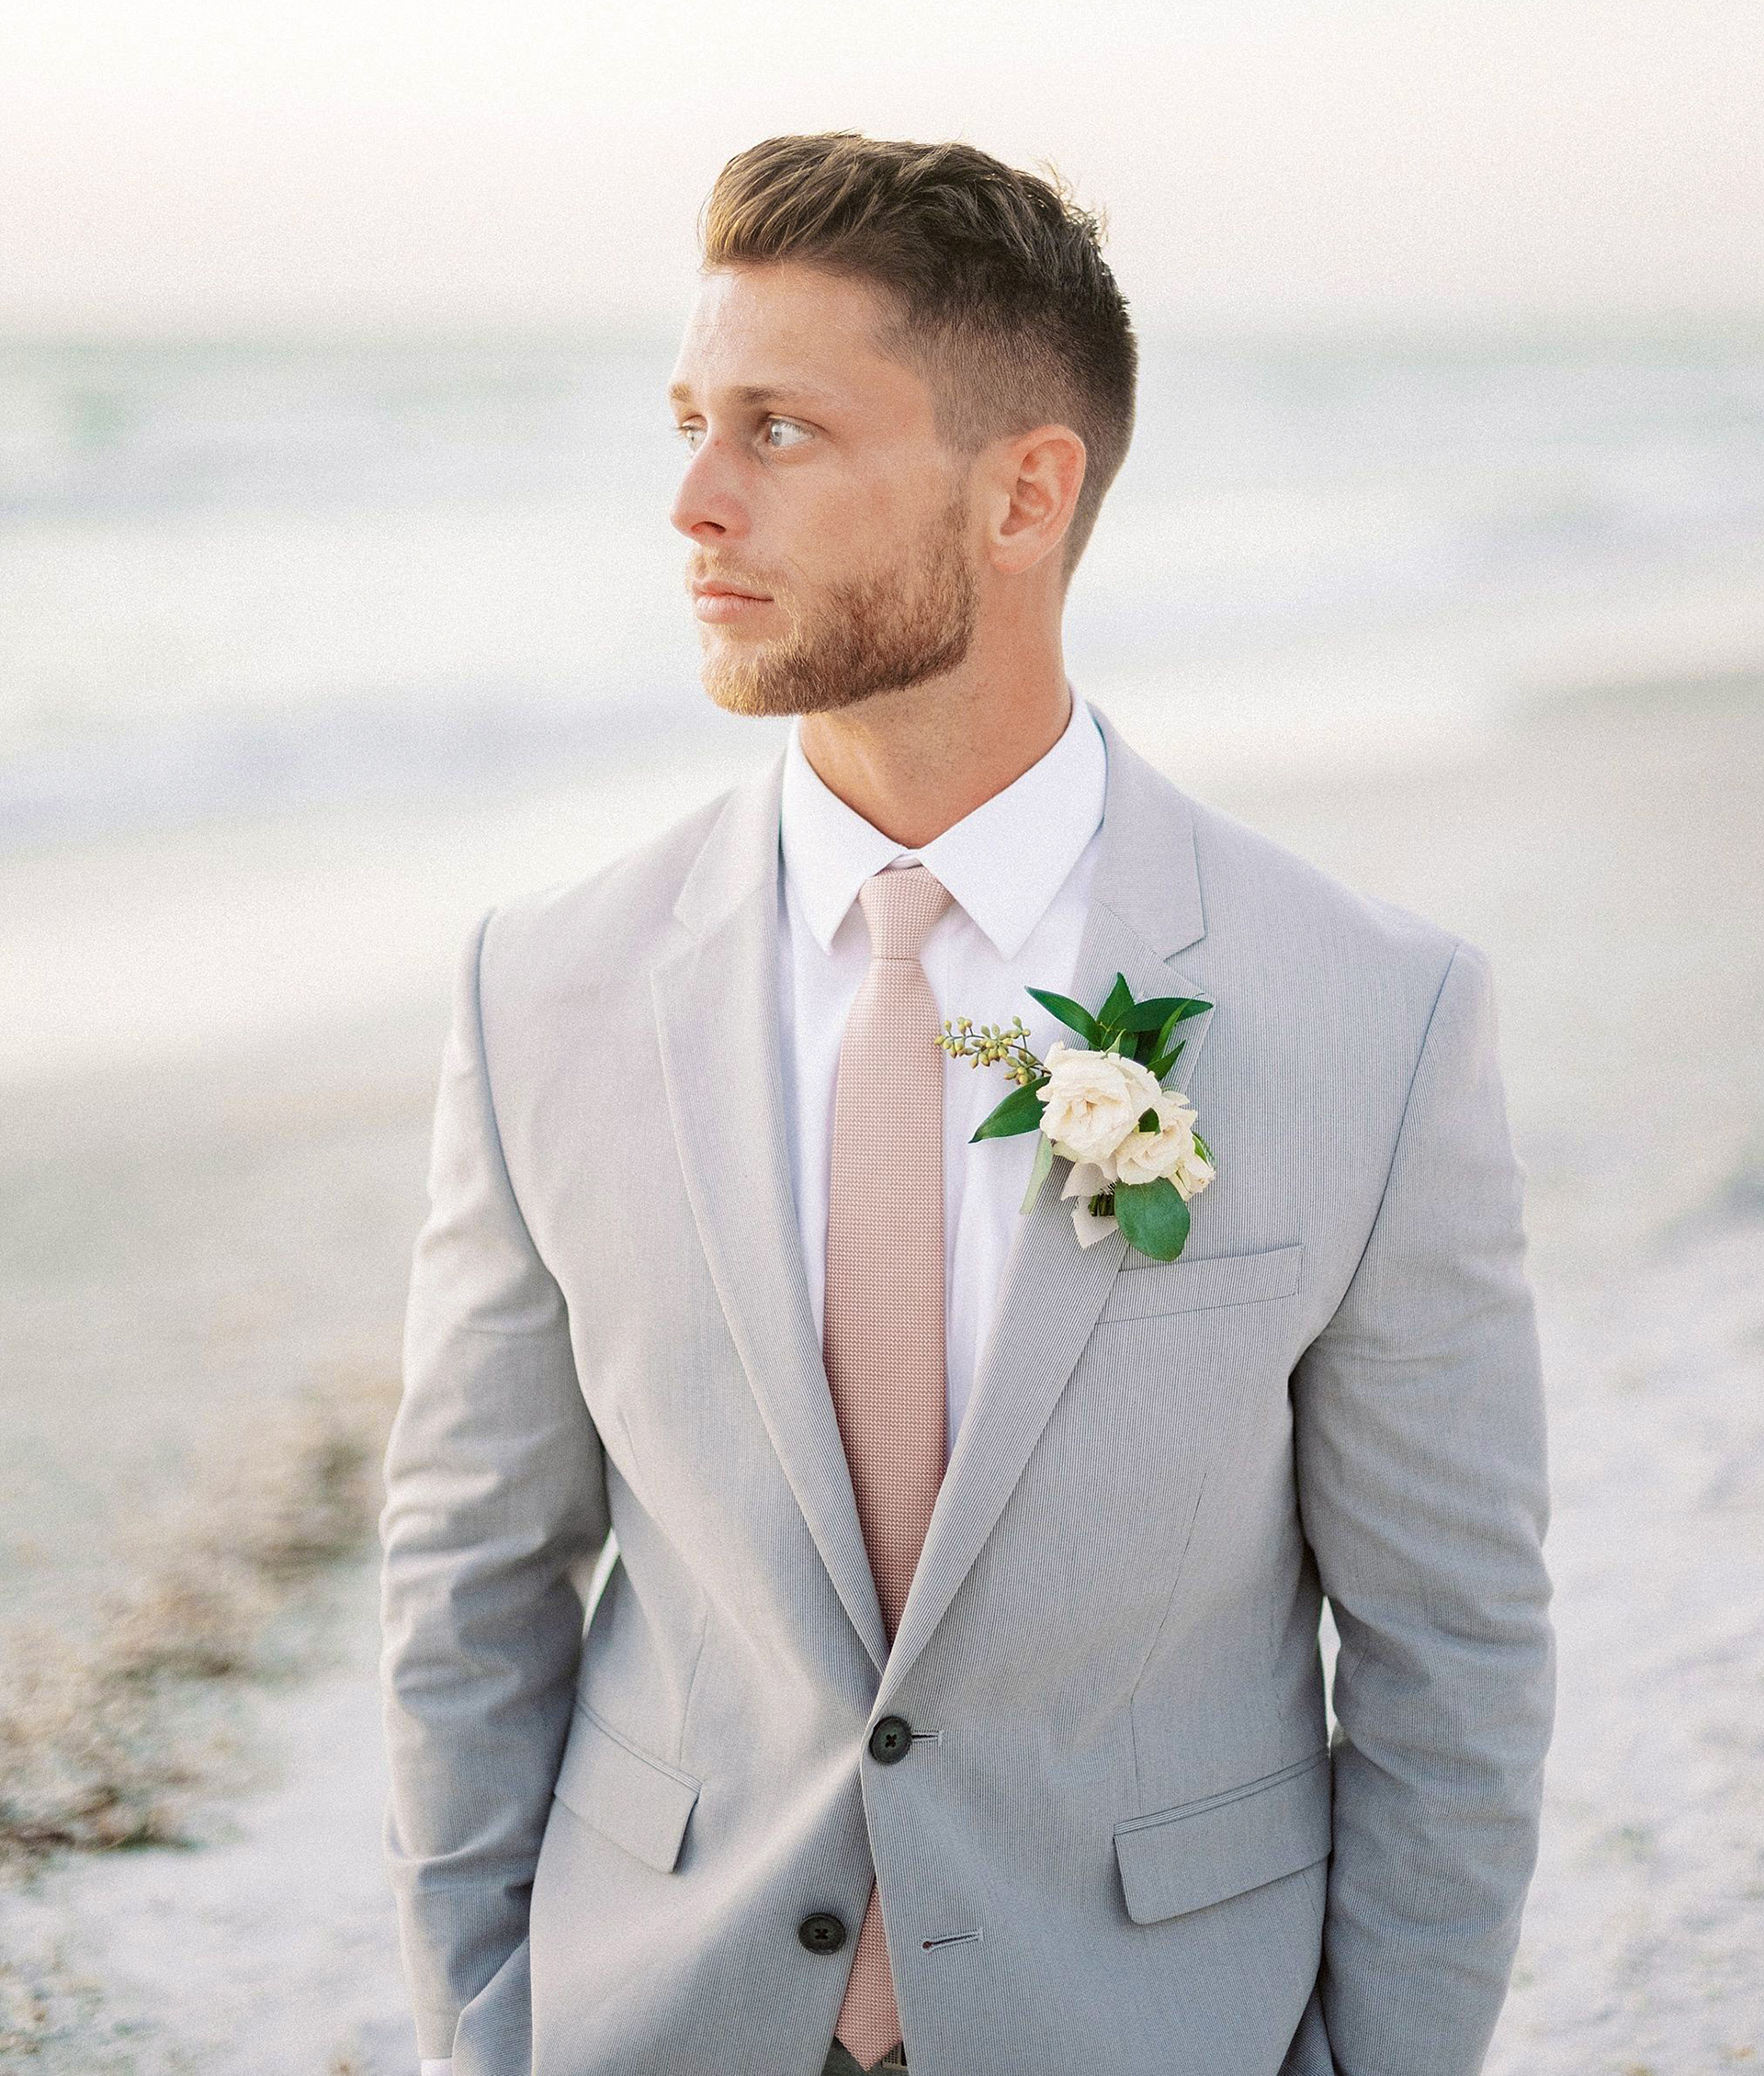 matching light grey suit with whtie shirt and light colored tie for summer wedding